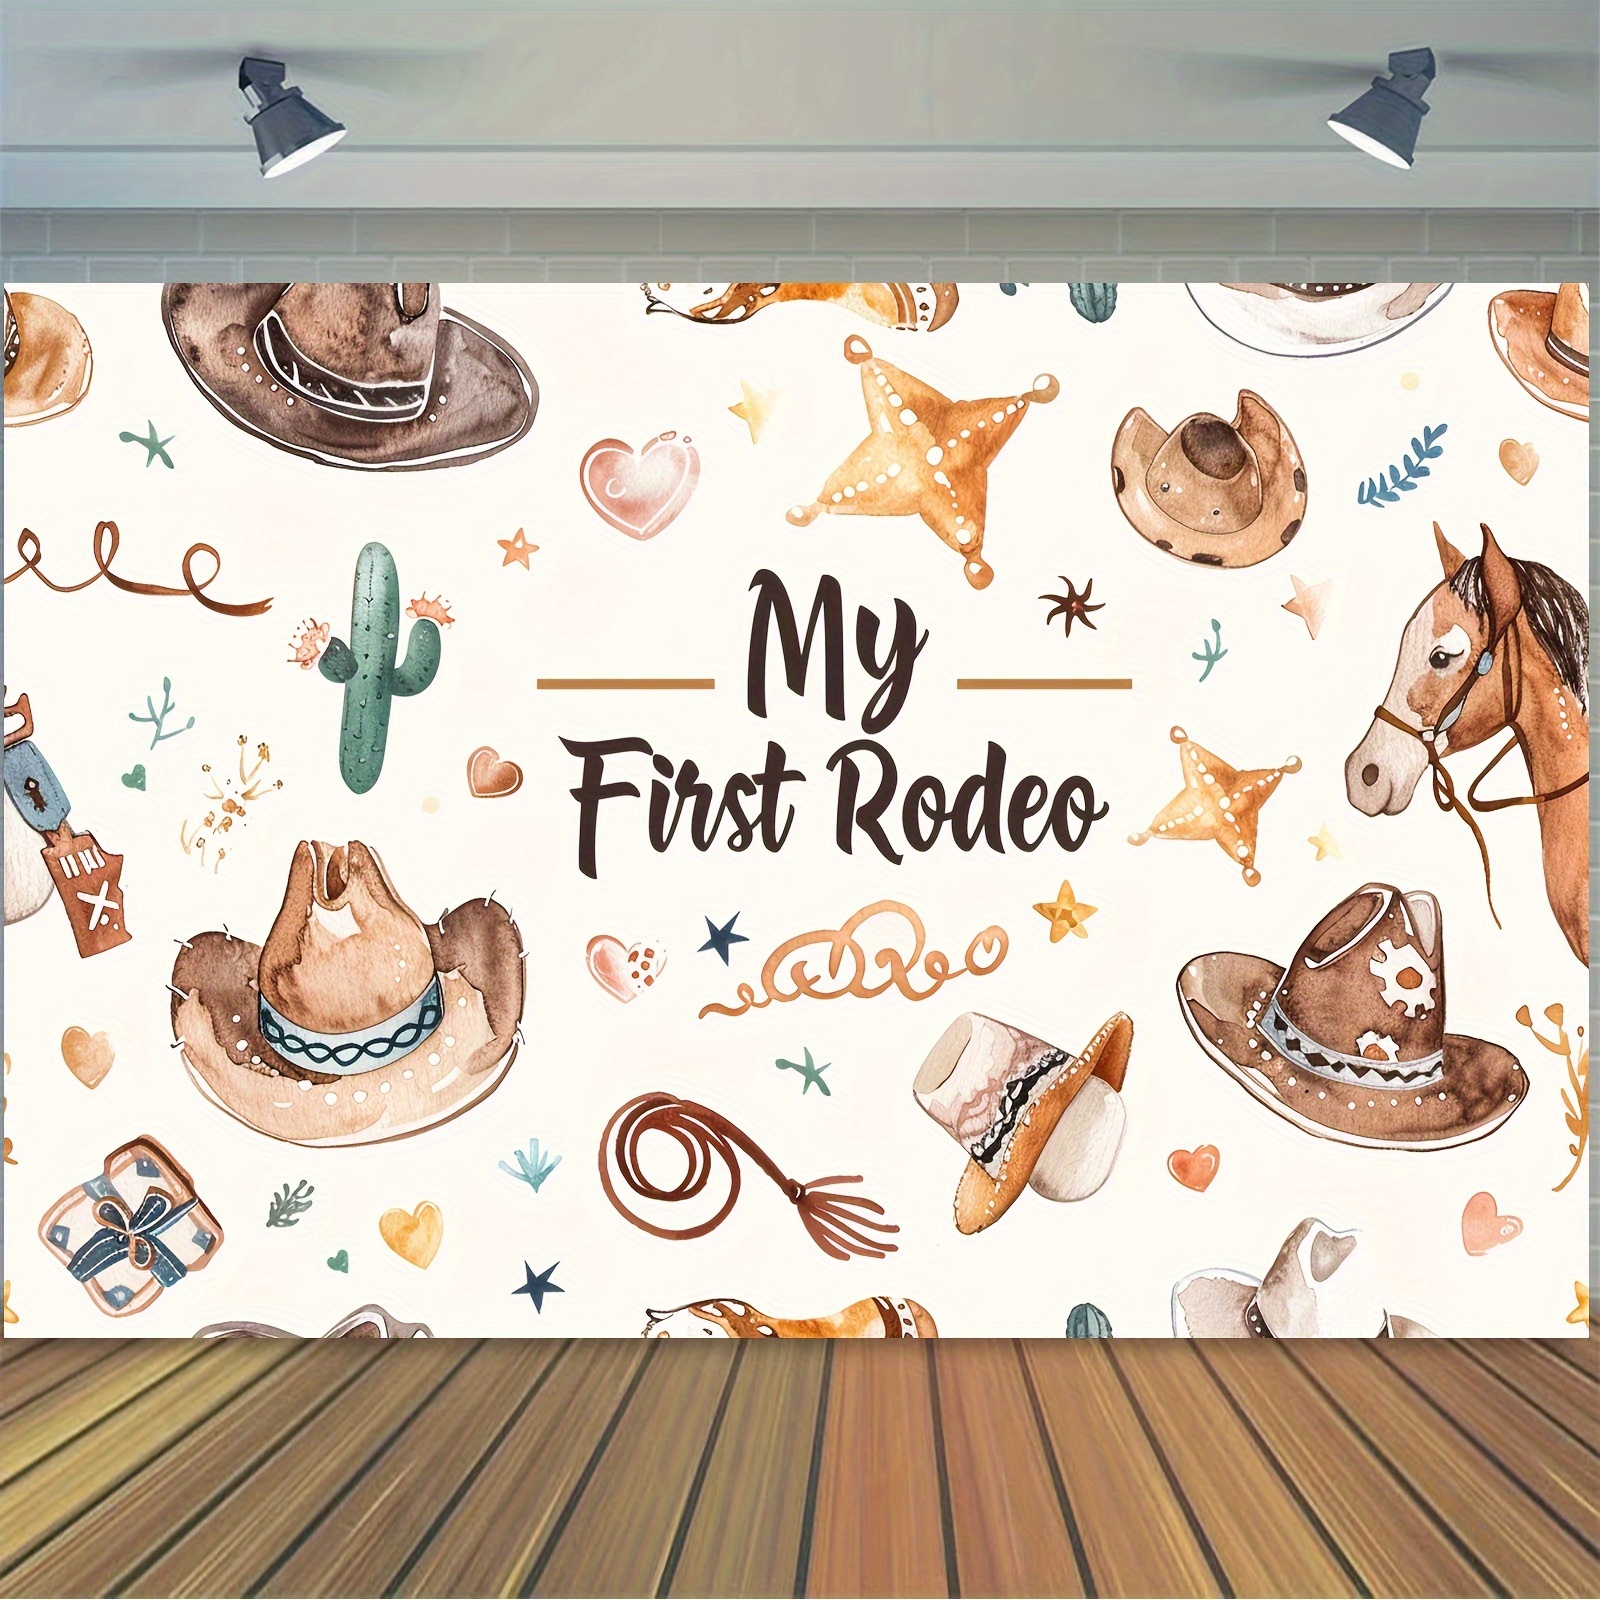 

1pc 5×3 Ft Backdrop, Rodeo Theme 1st Birthday Party Decorations Rodeo Mexican Cactus Girls Boys Birthday Party Photography Background Banner First Rodeo Party Supplies Brown